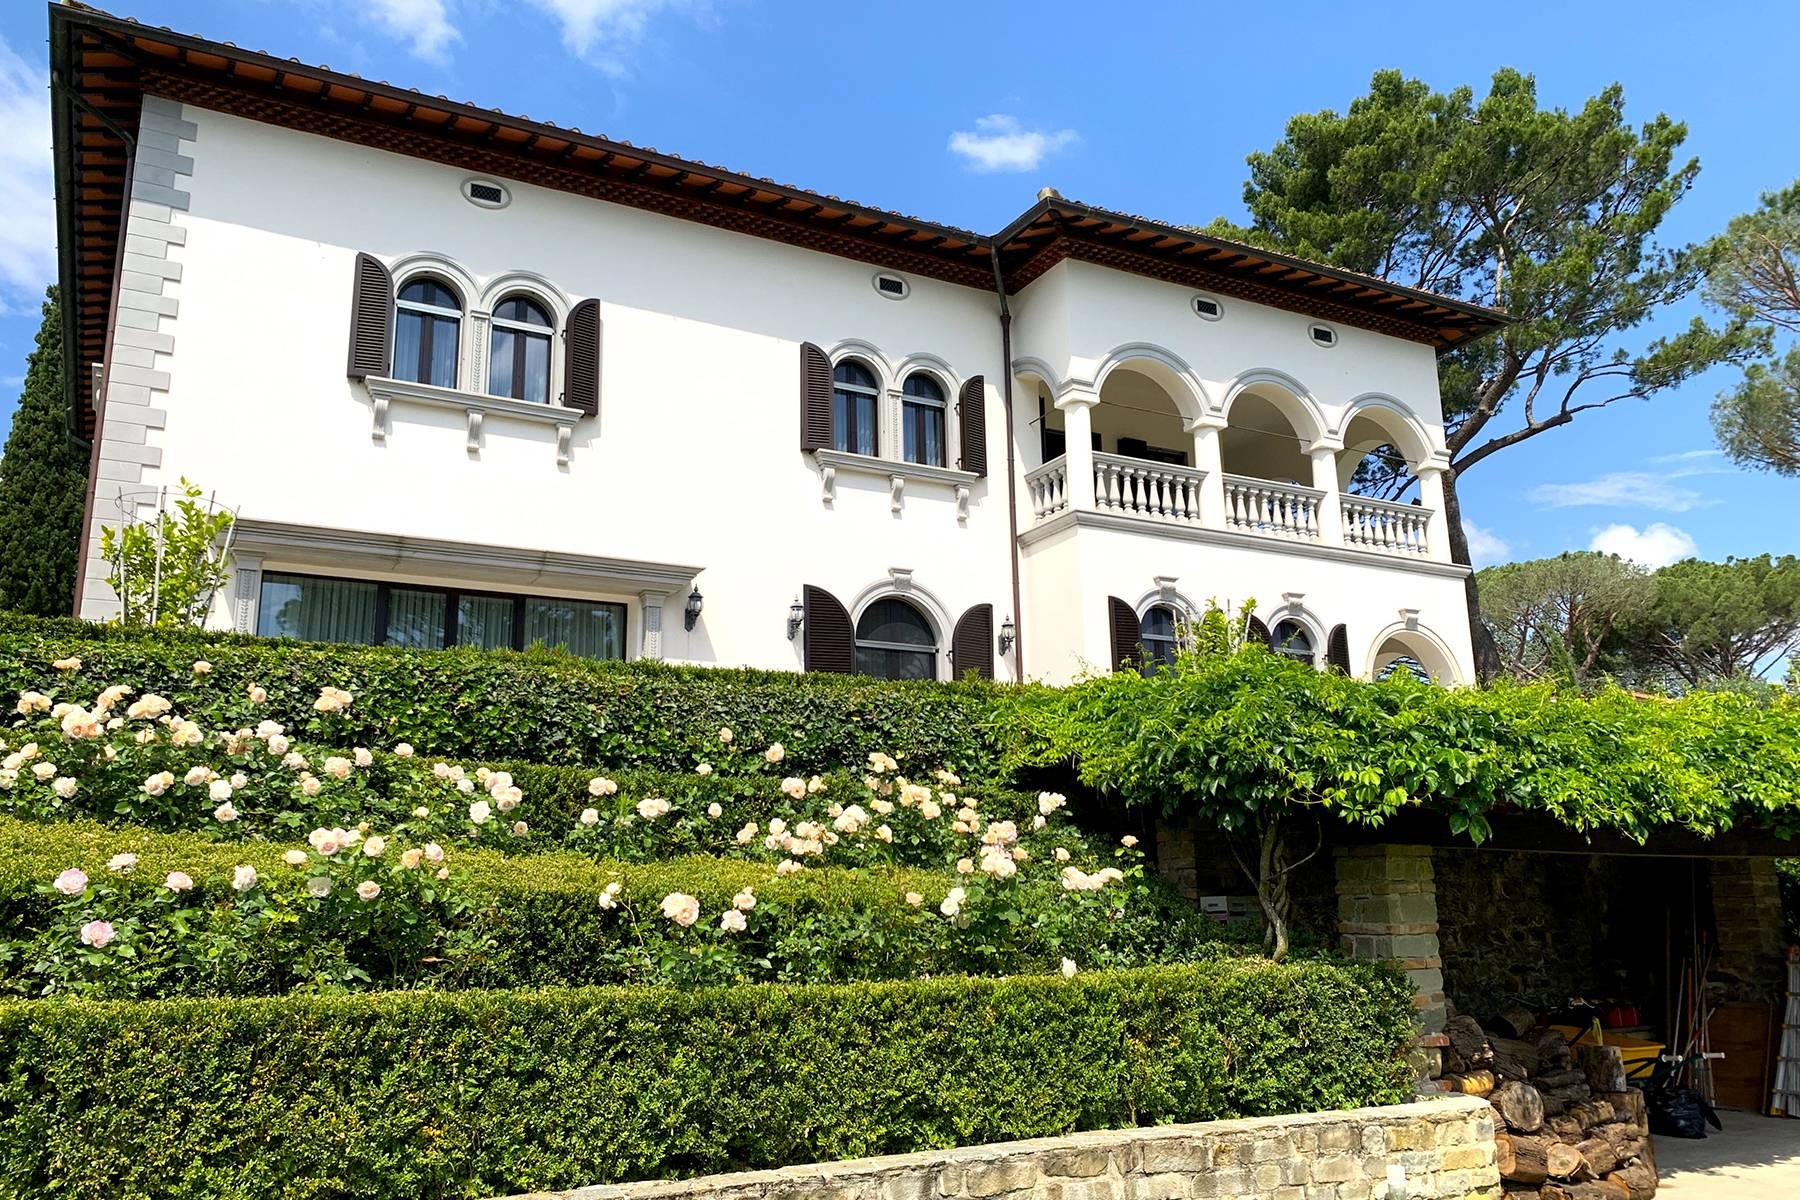 Splendid villa with pool on the Poggio Imperiale hill in Florence - 6